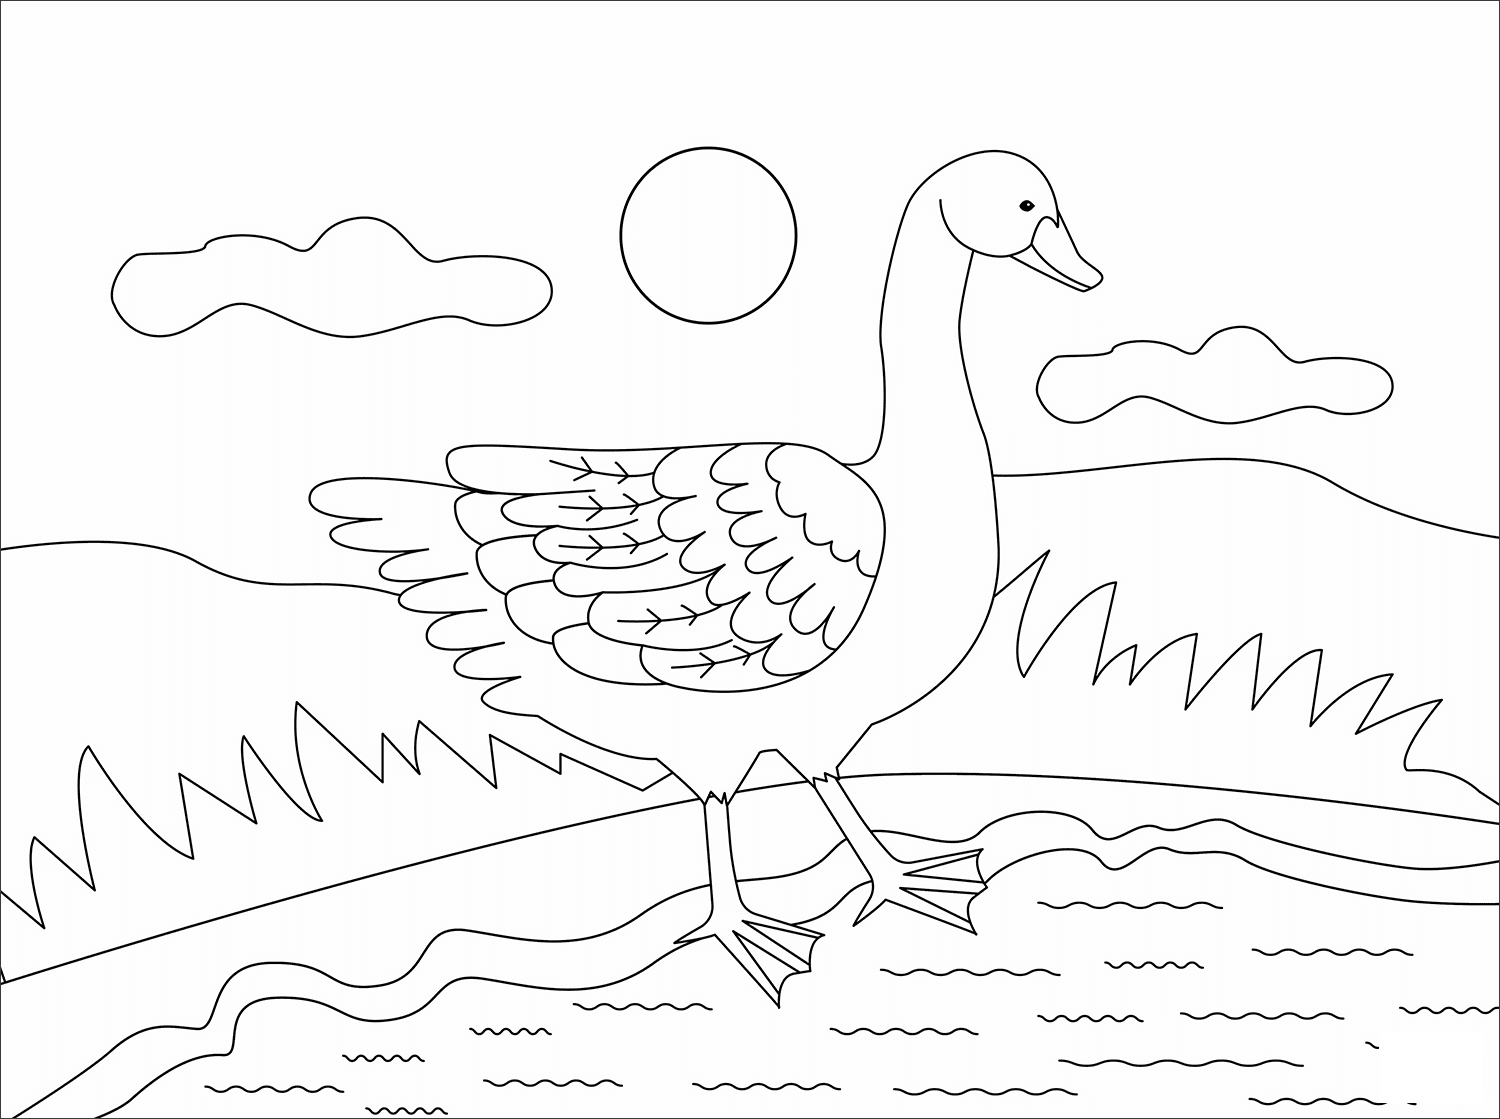 Goose Animal Simple Coloring Page